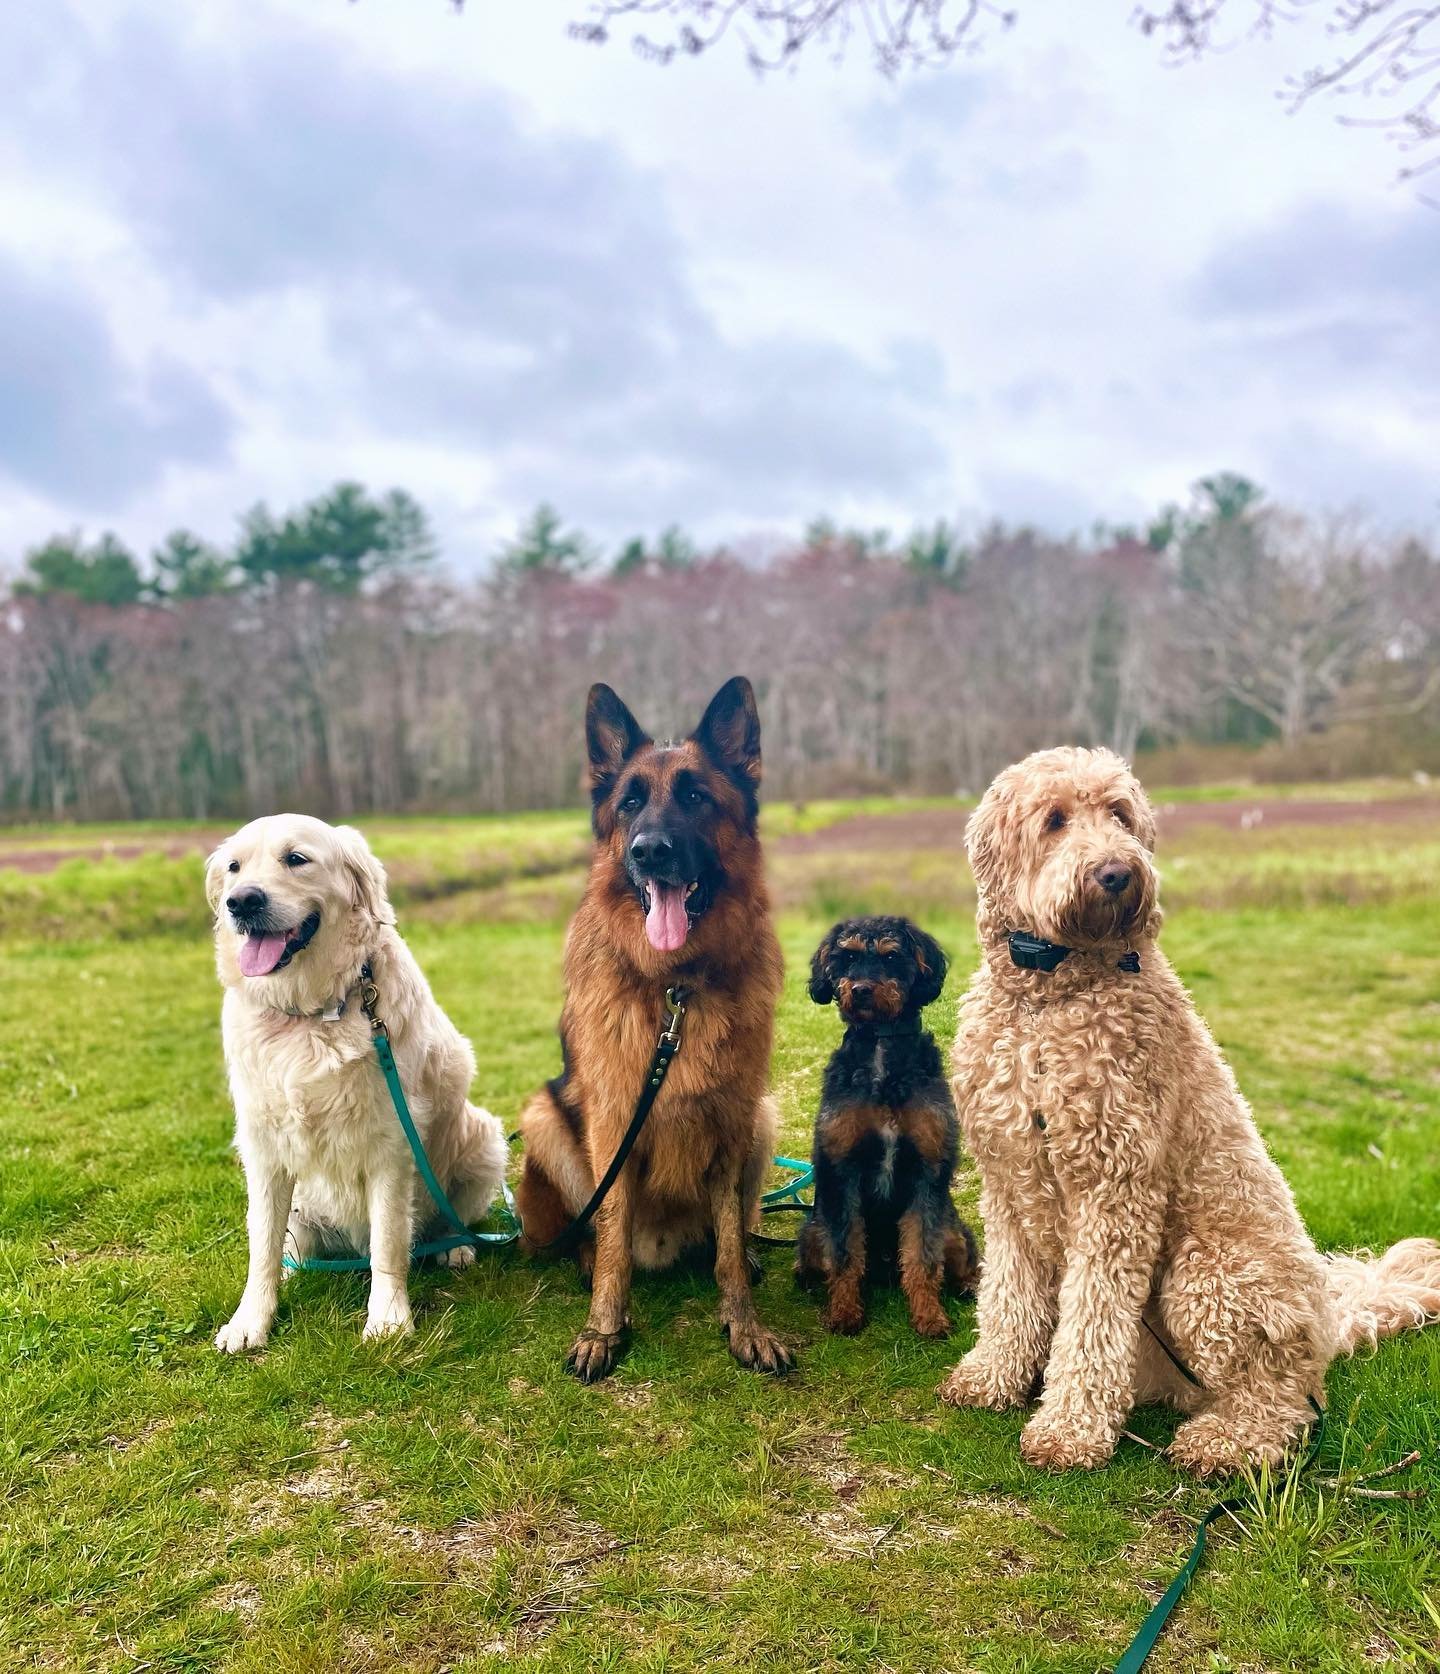 Bretton, Axel, Bear, and Maisie 🐾 spending the day chasing geese, playing in spring mud, and choosing between all the sticks in the world which one is the best to keep away